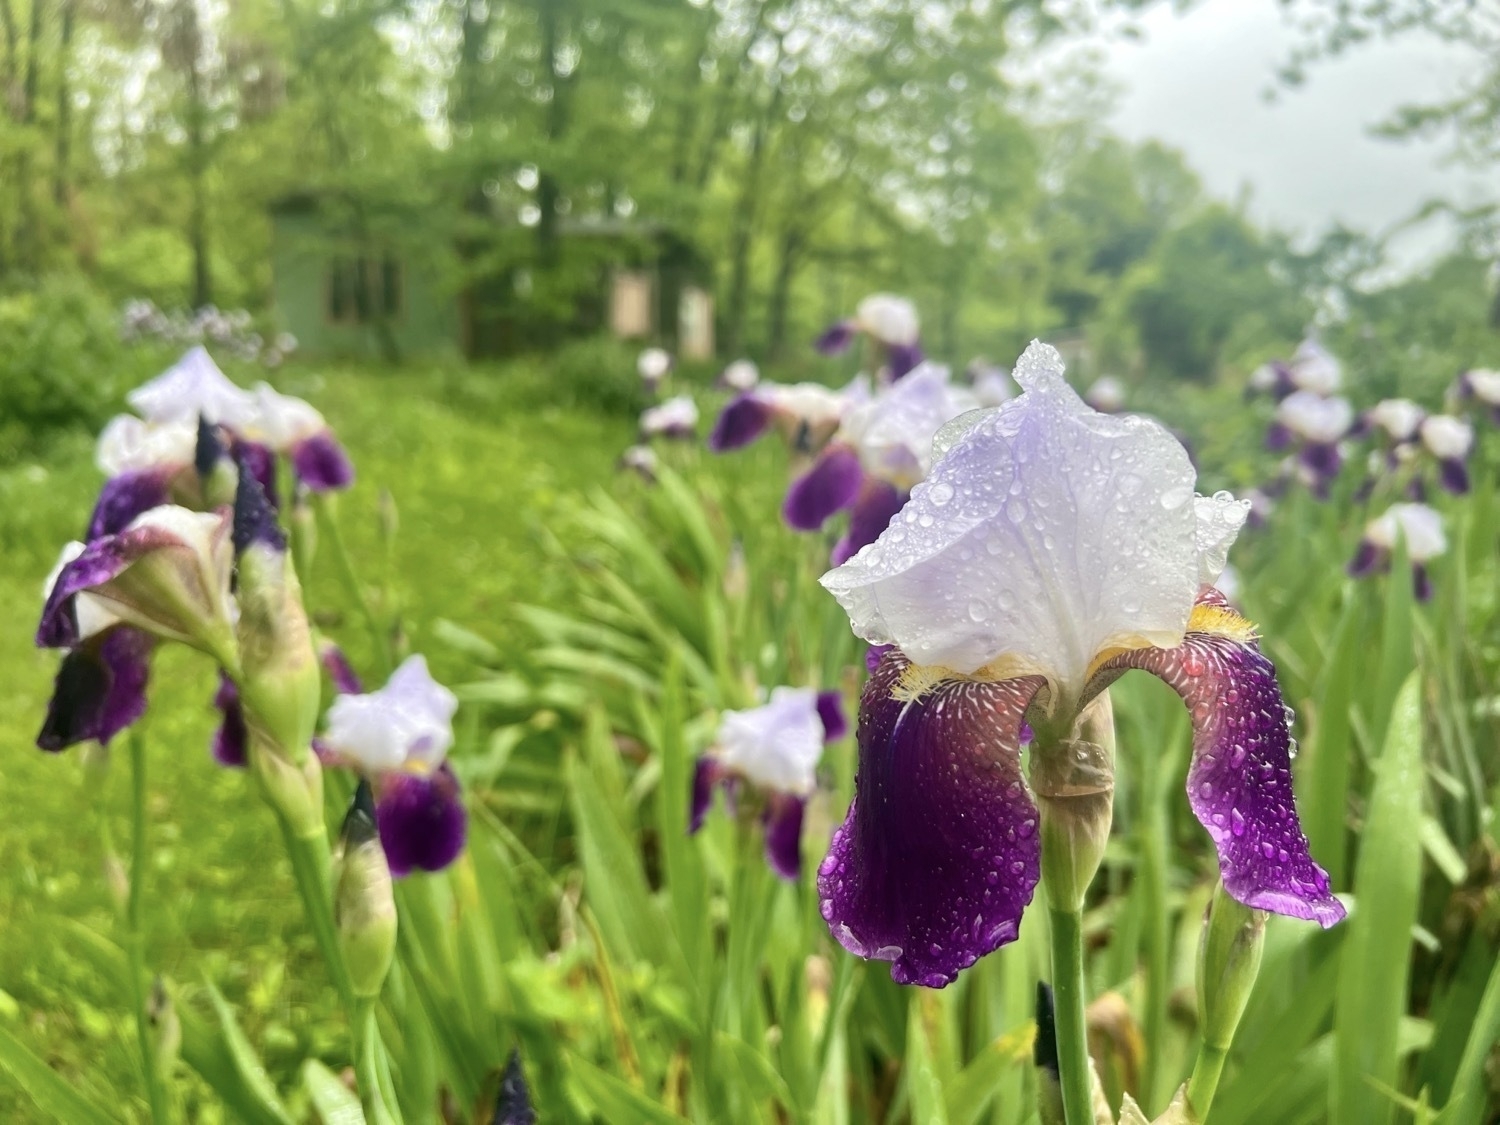 An iris flower covered in morning rain drops. The flower has dark purple lower petals and pale purple upper petals. Centered in the dark purple petals are yellow portions that are feather like. A small cabin surrounded by trees is blurred in the background.